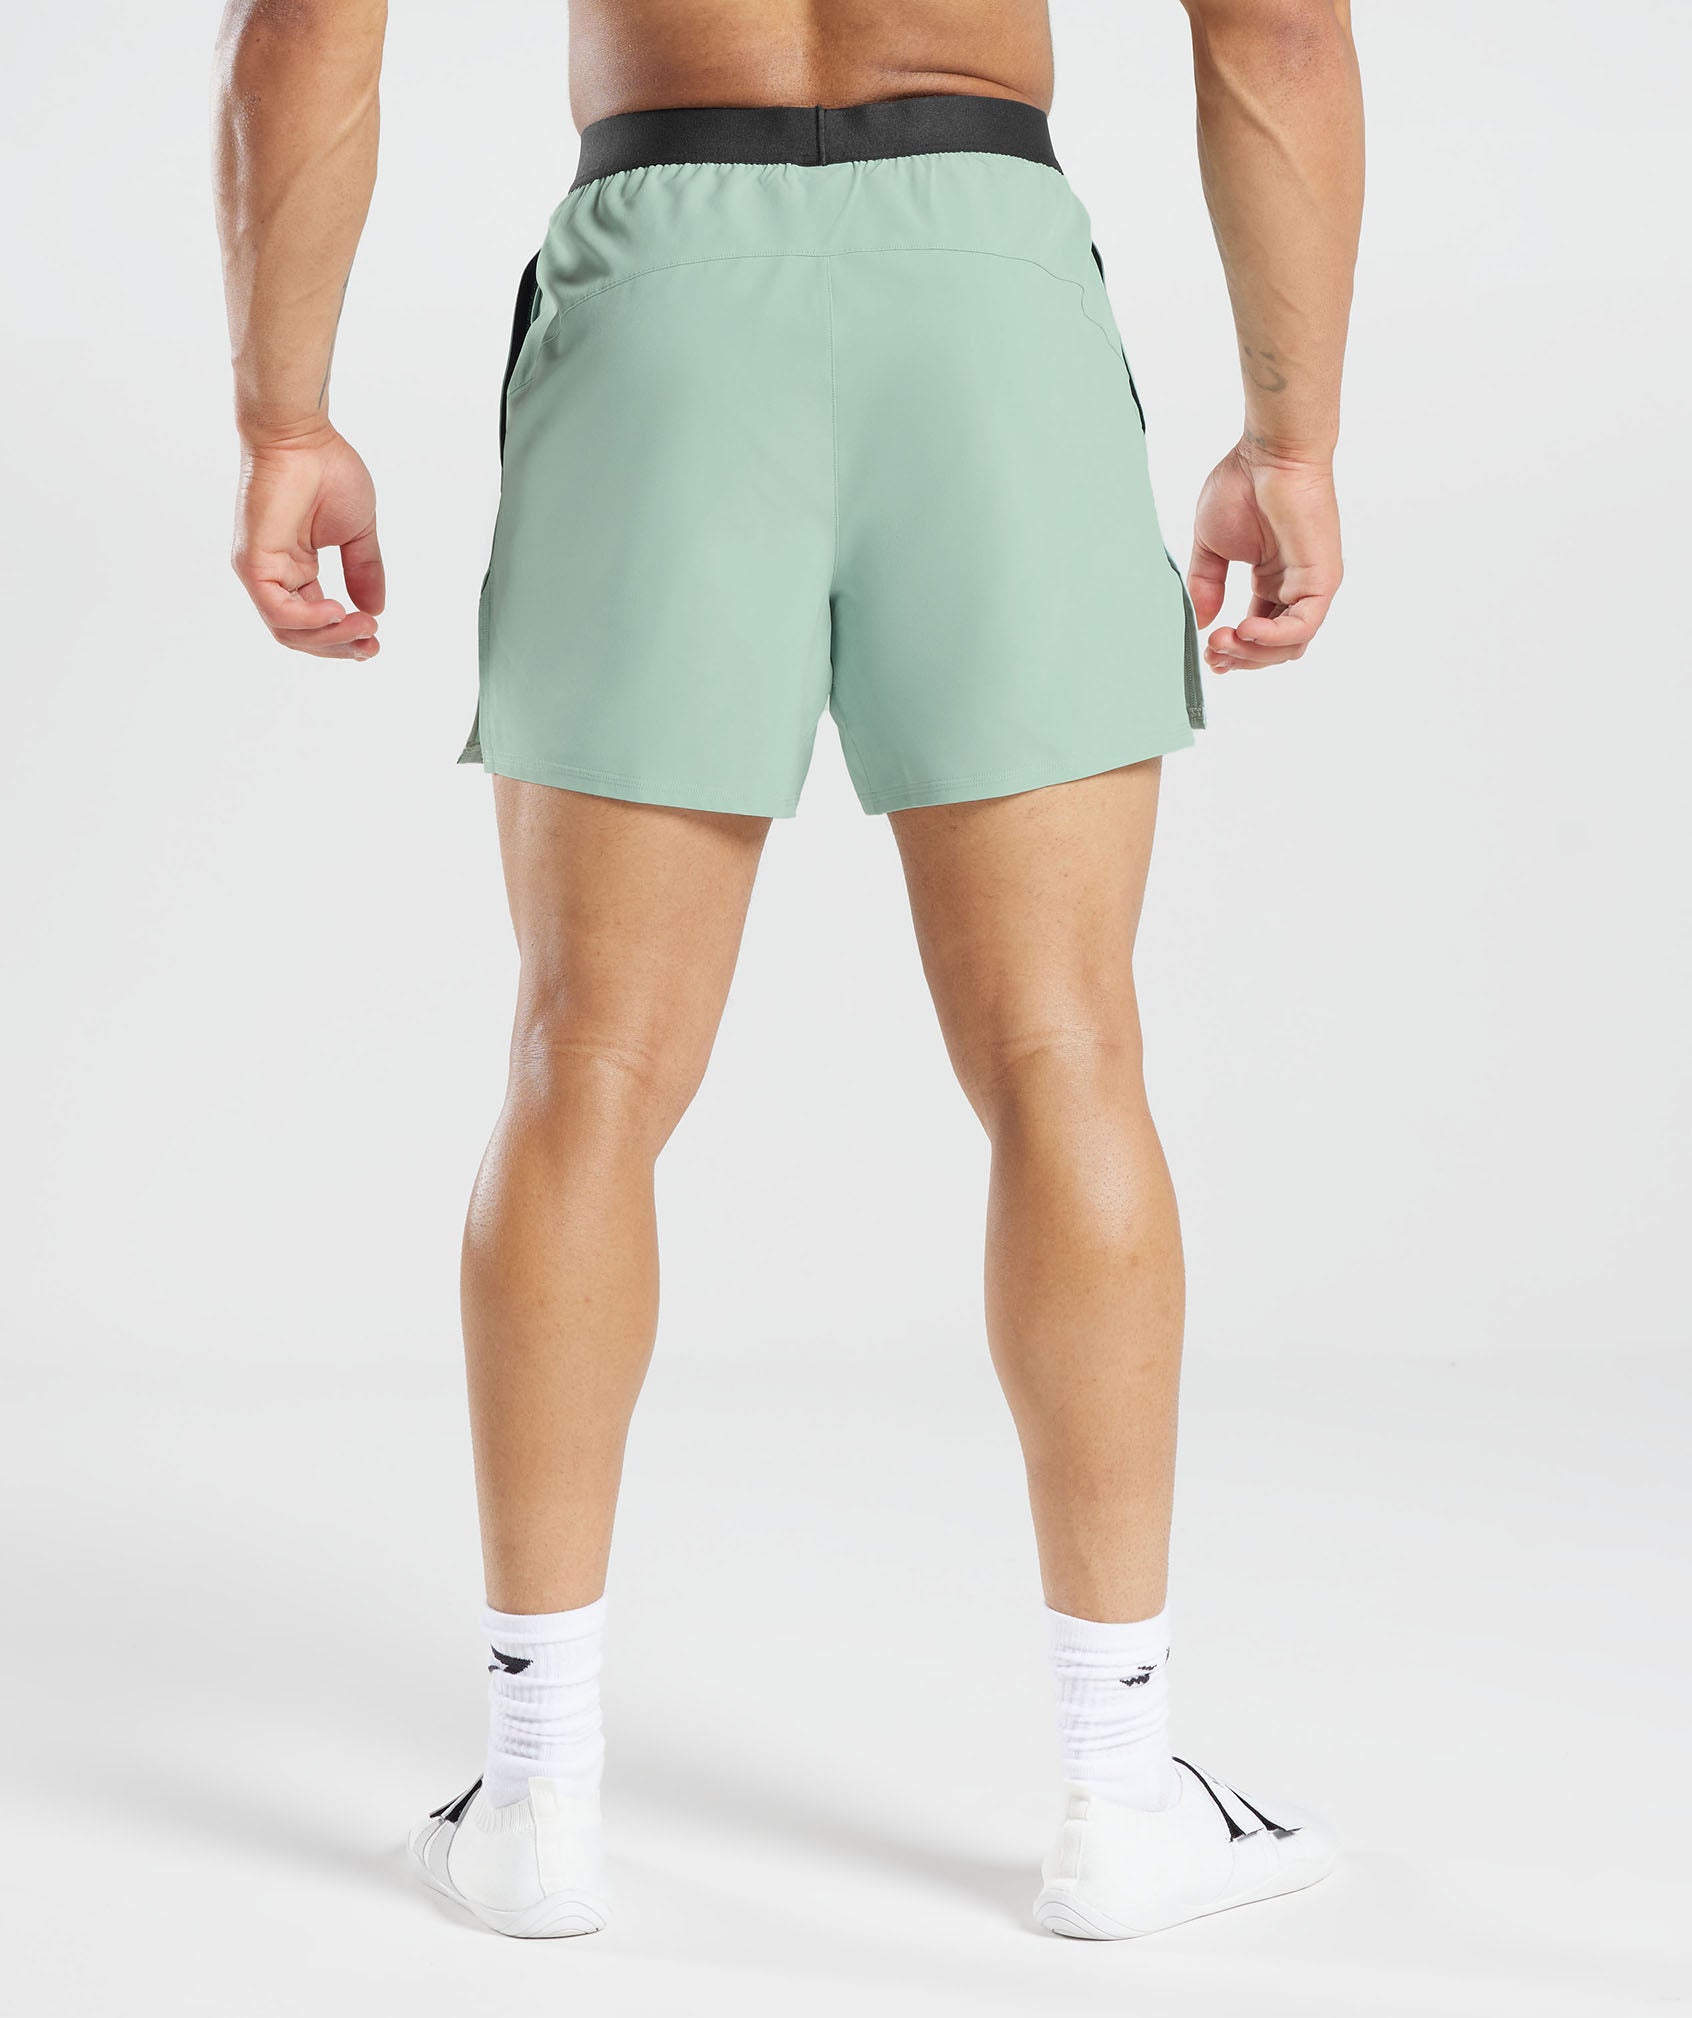 315 Woven Shorts in Frost Teal - view 2